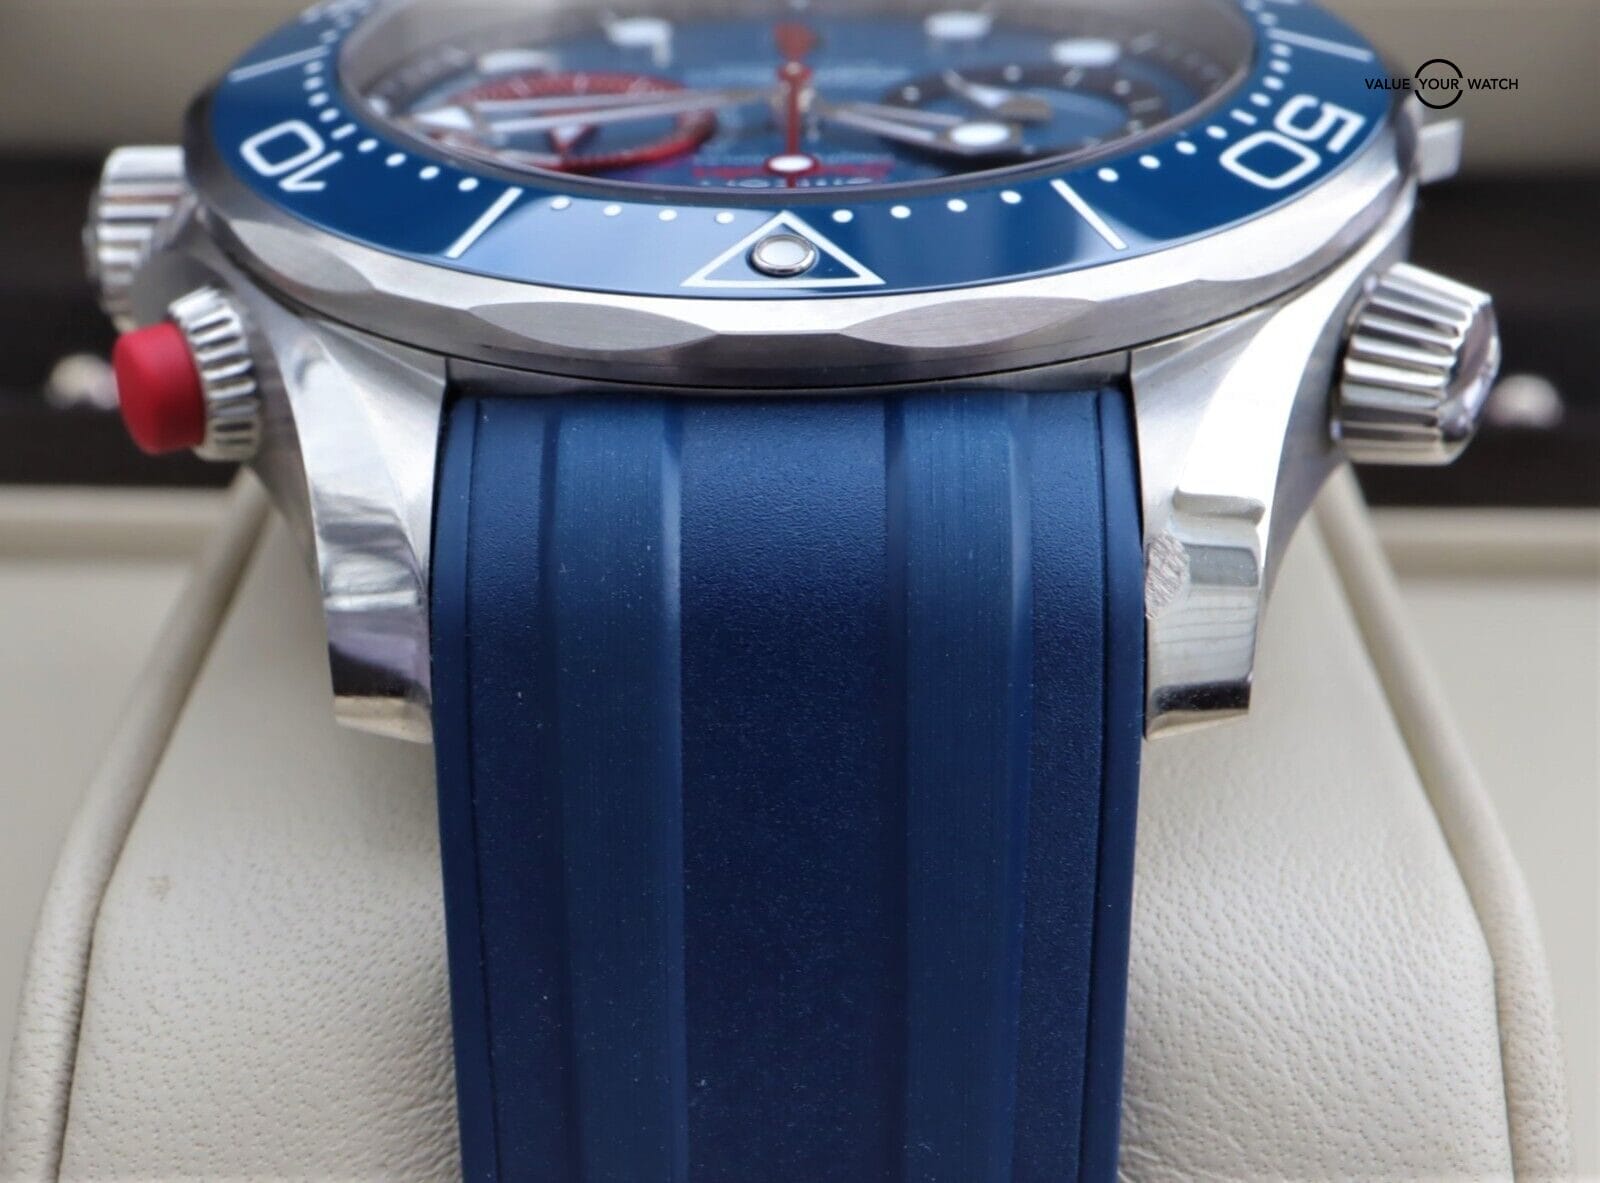 Seamaster America's Cup Watch 210.30.44.51.03.002